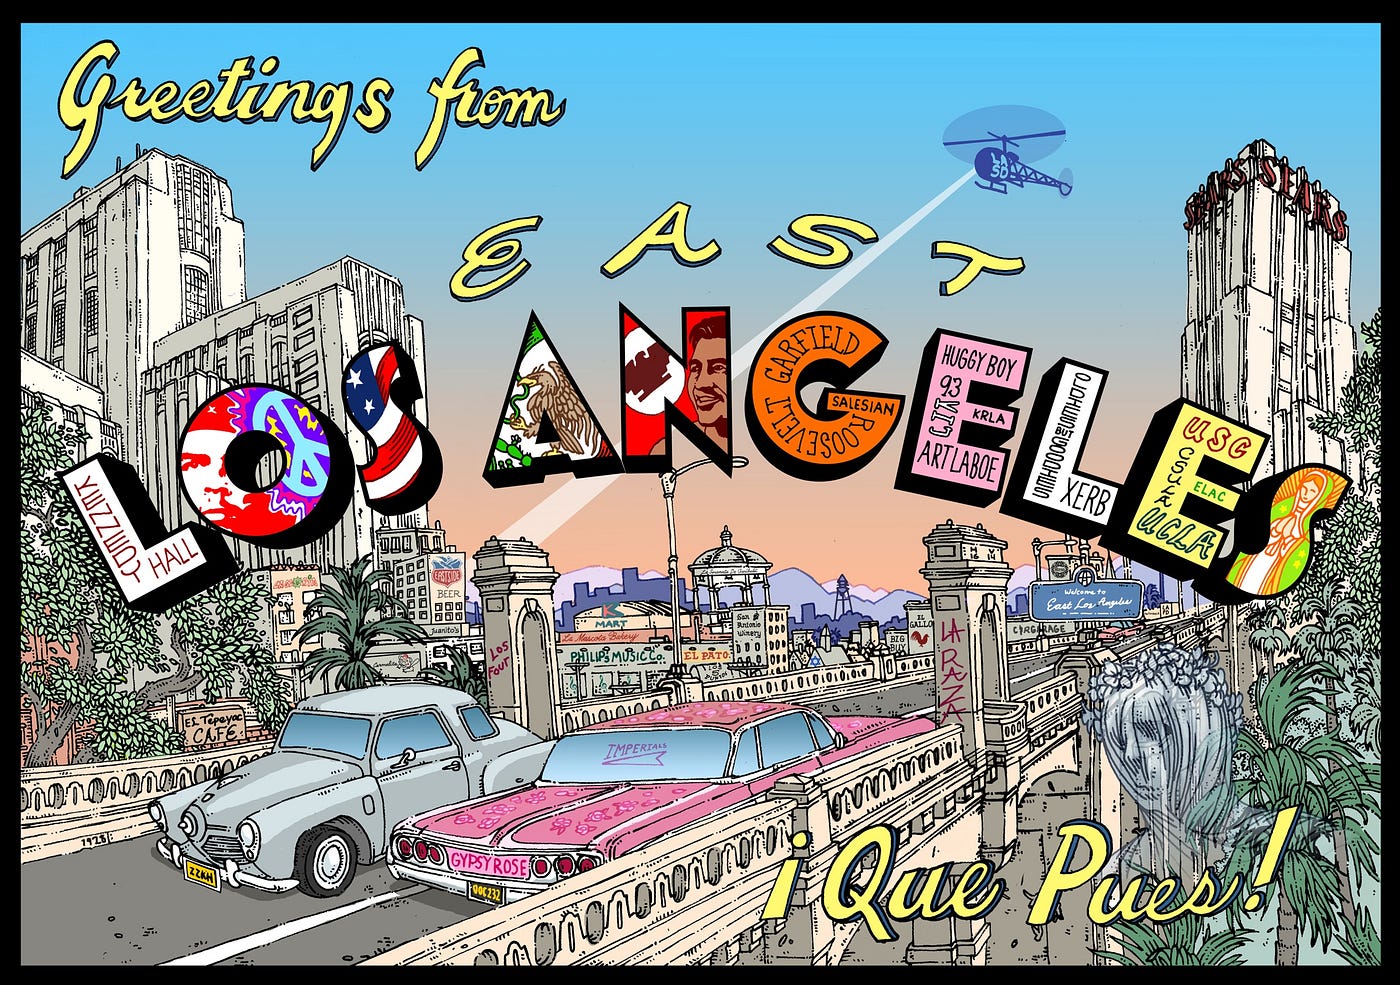 24 Hours in East L.A. An Insiders Guide by Luciano Hidalgo Medium